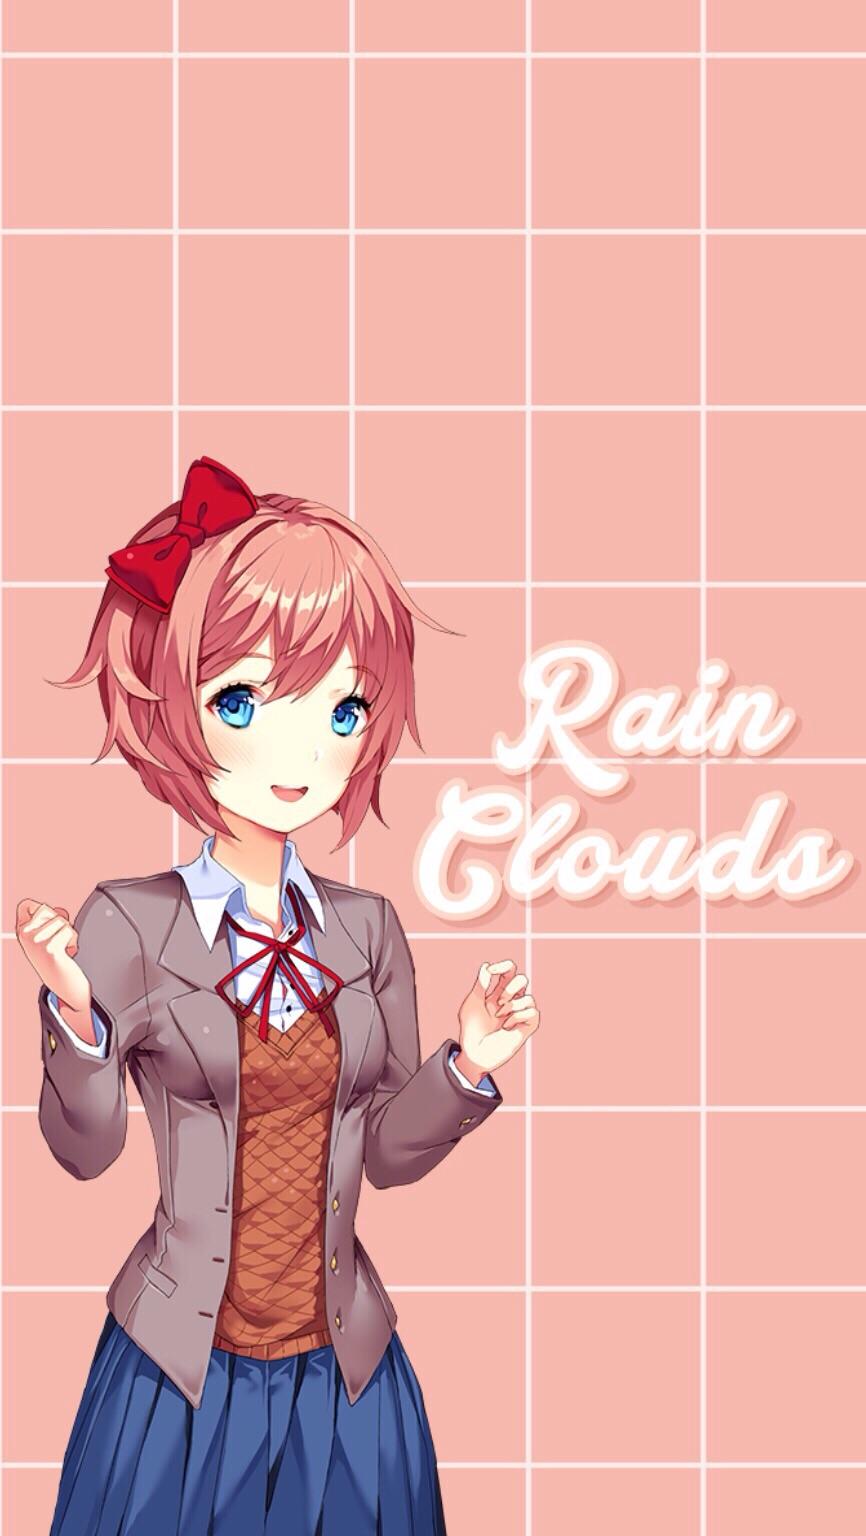 Tried making a simple Sayori wallpaper! Feel free to use it if you